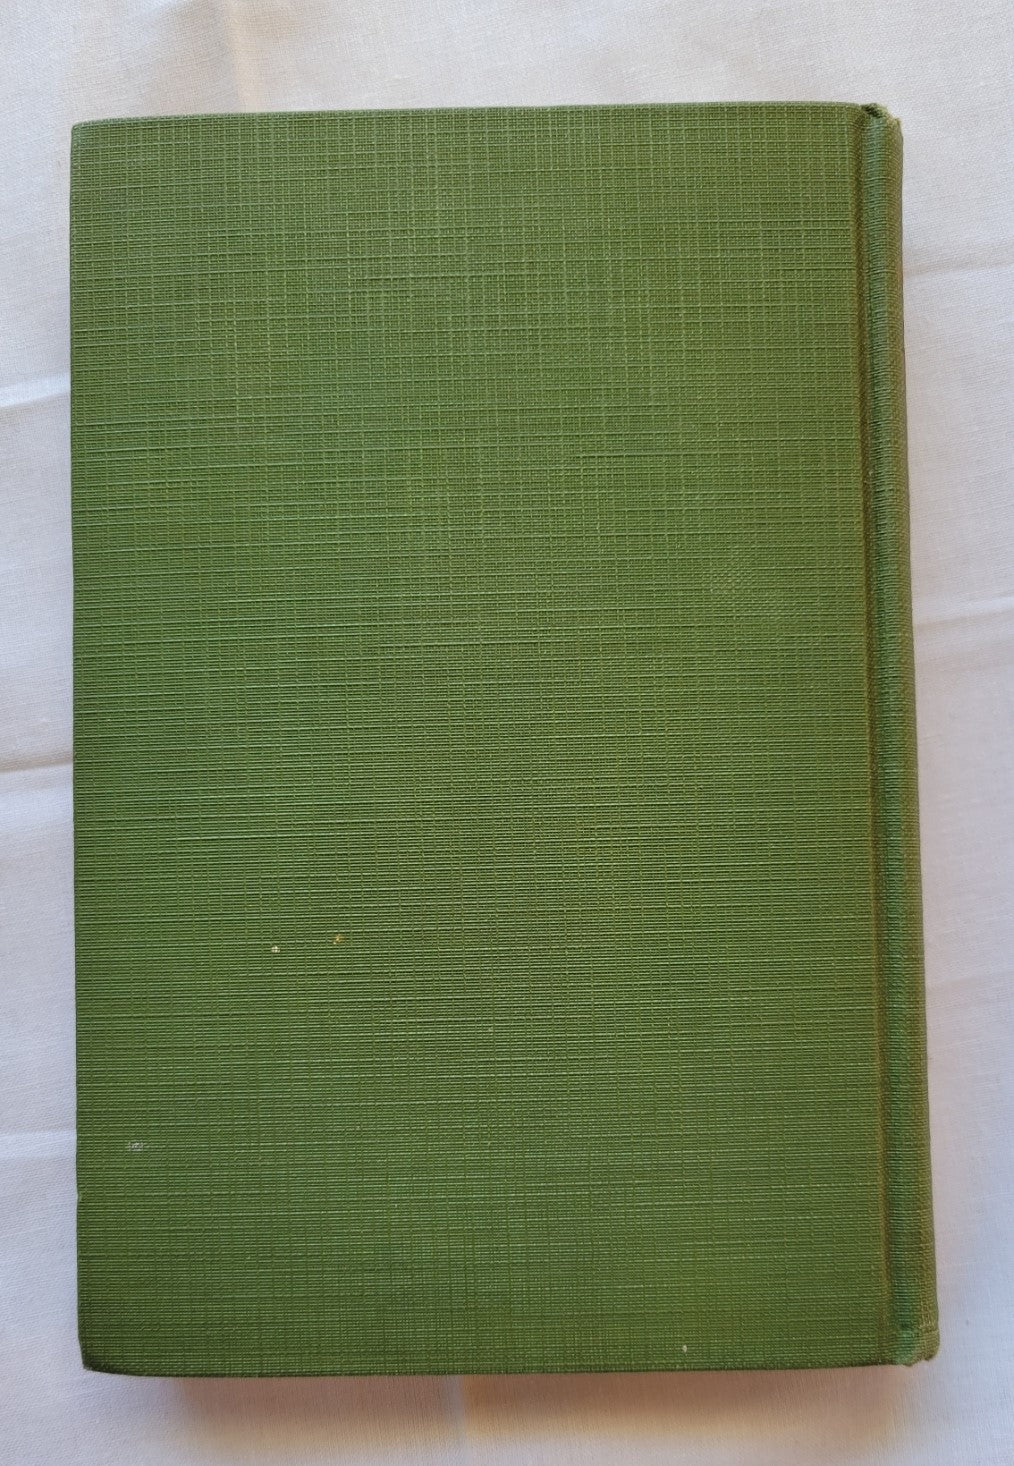  Antique book for sale "The Christ on Indian Road" by E. Stanley Jones, published by Abingdon Press, 1926. Back cover.